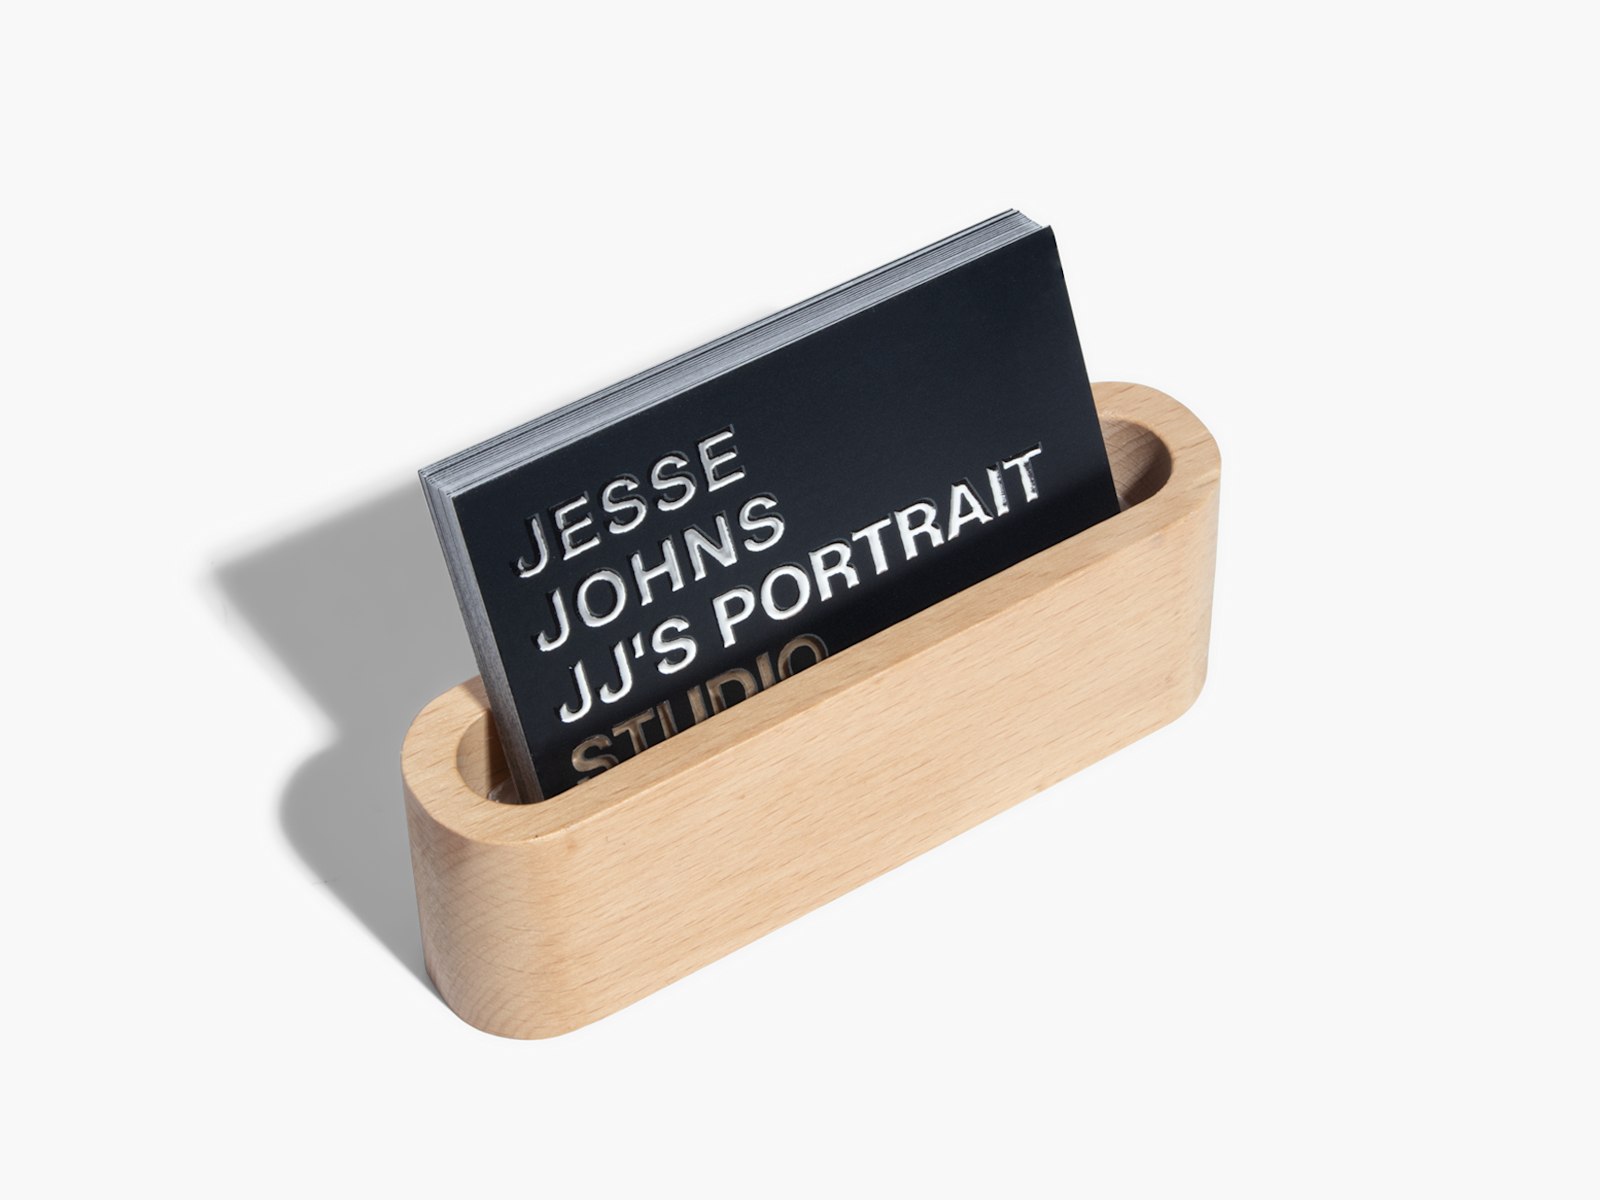 Raised foil business cards promoting a portrait studio, in a wooden business card holder.